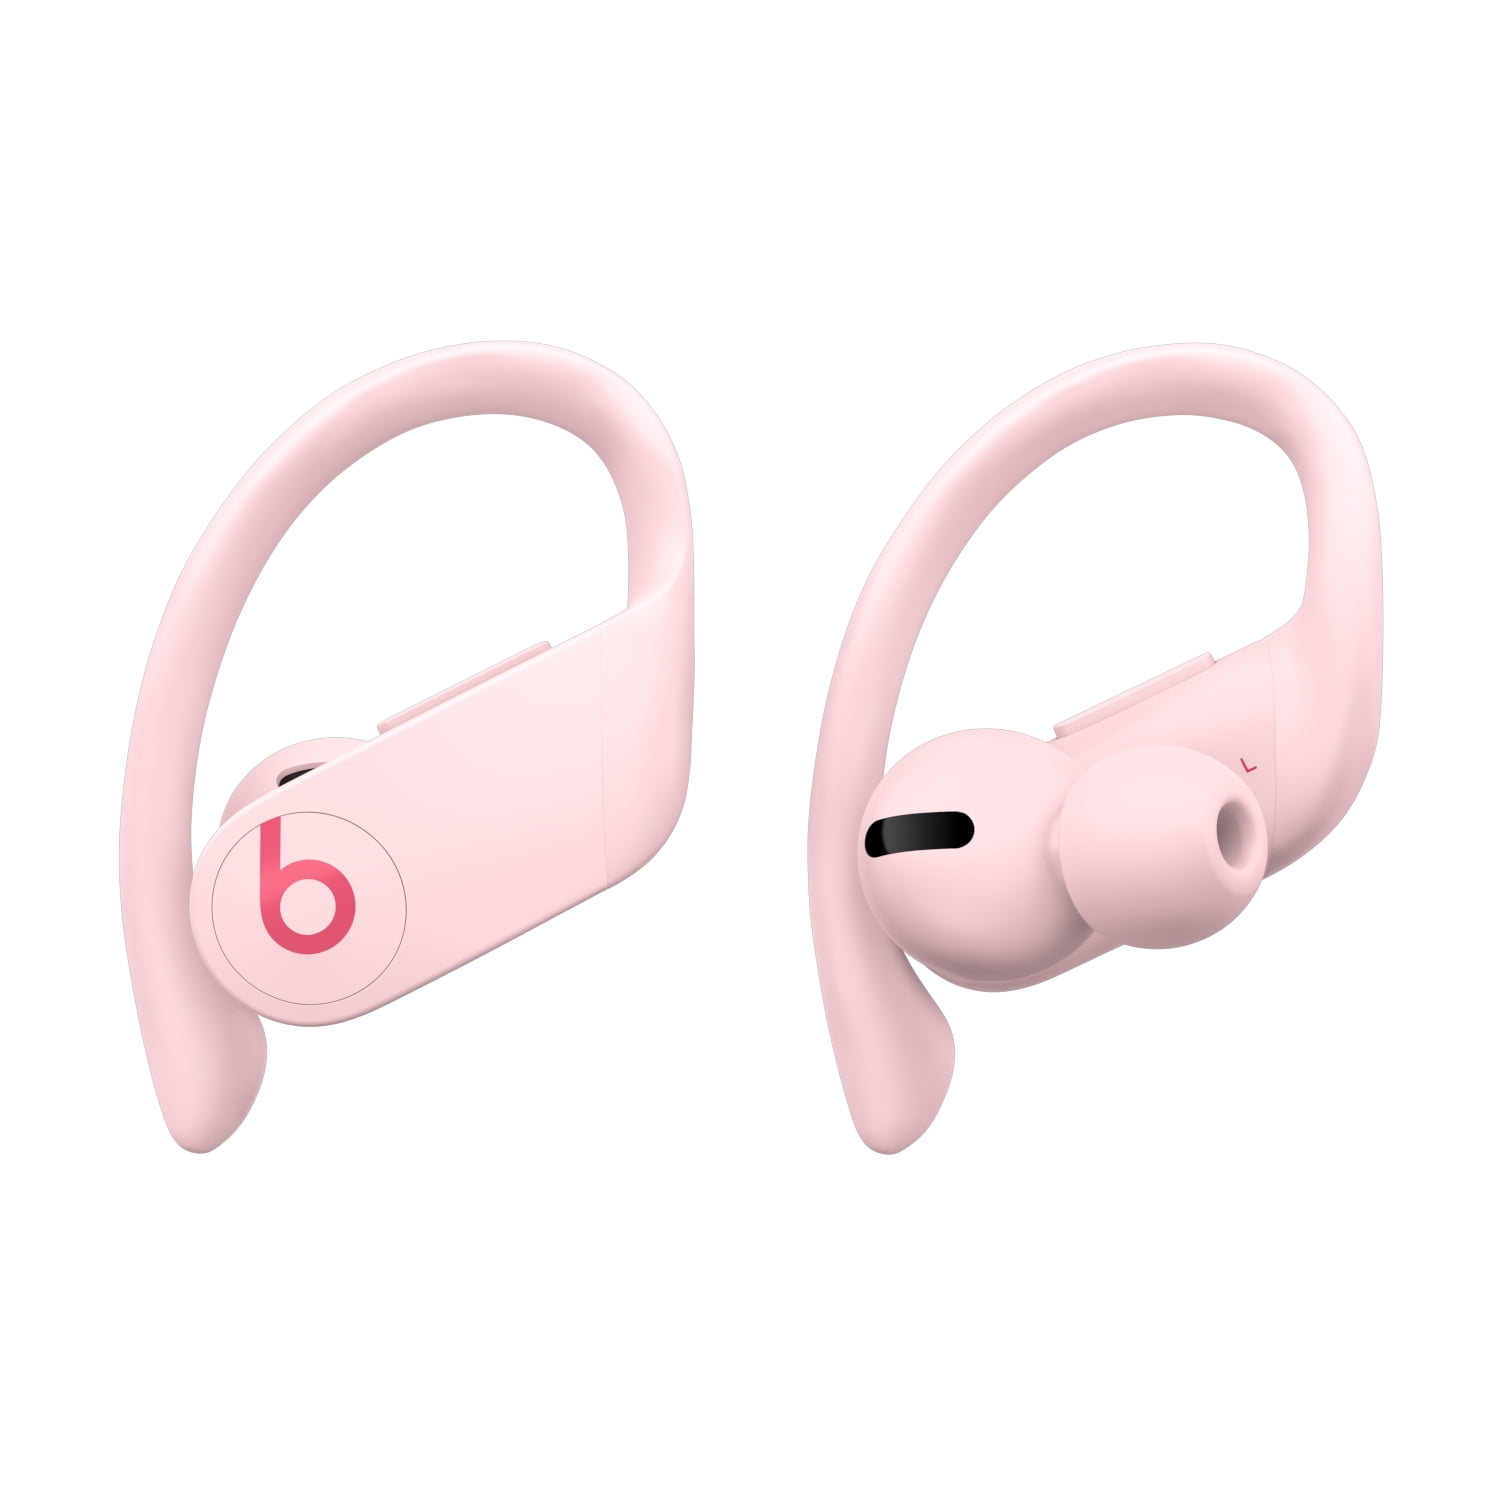 can powerbeats pro connect to ps4